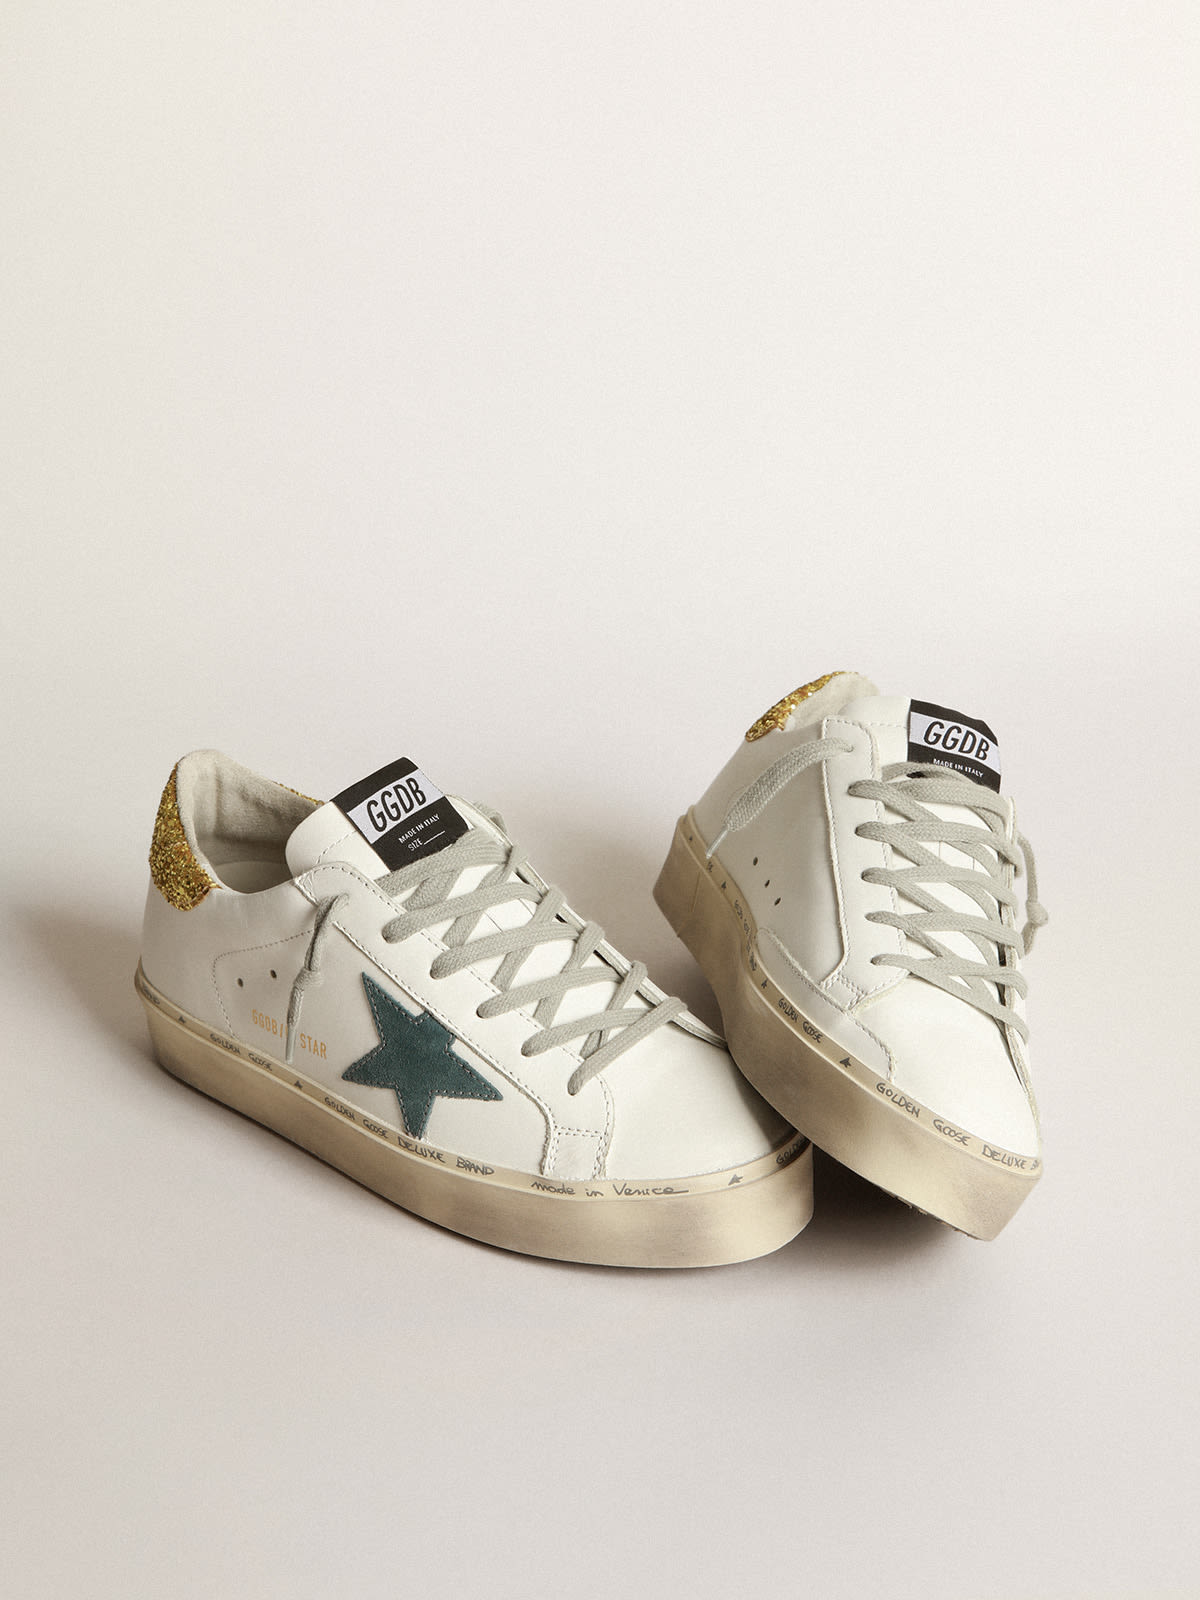 Golden Goose - Hi Star sneakers with petrol-blue suede star and gold glitter heel tab in 